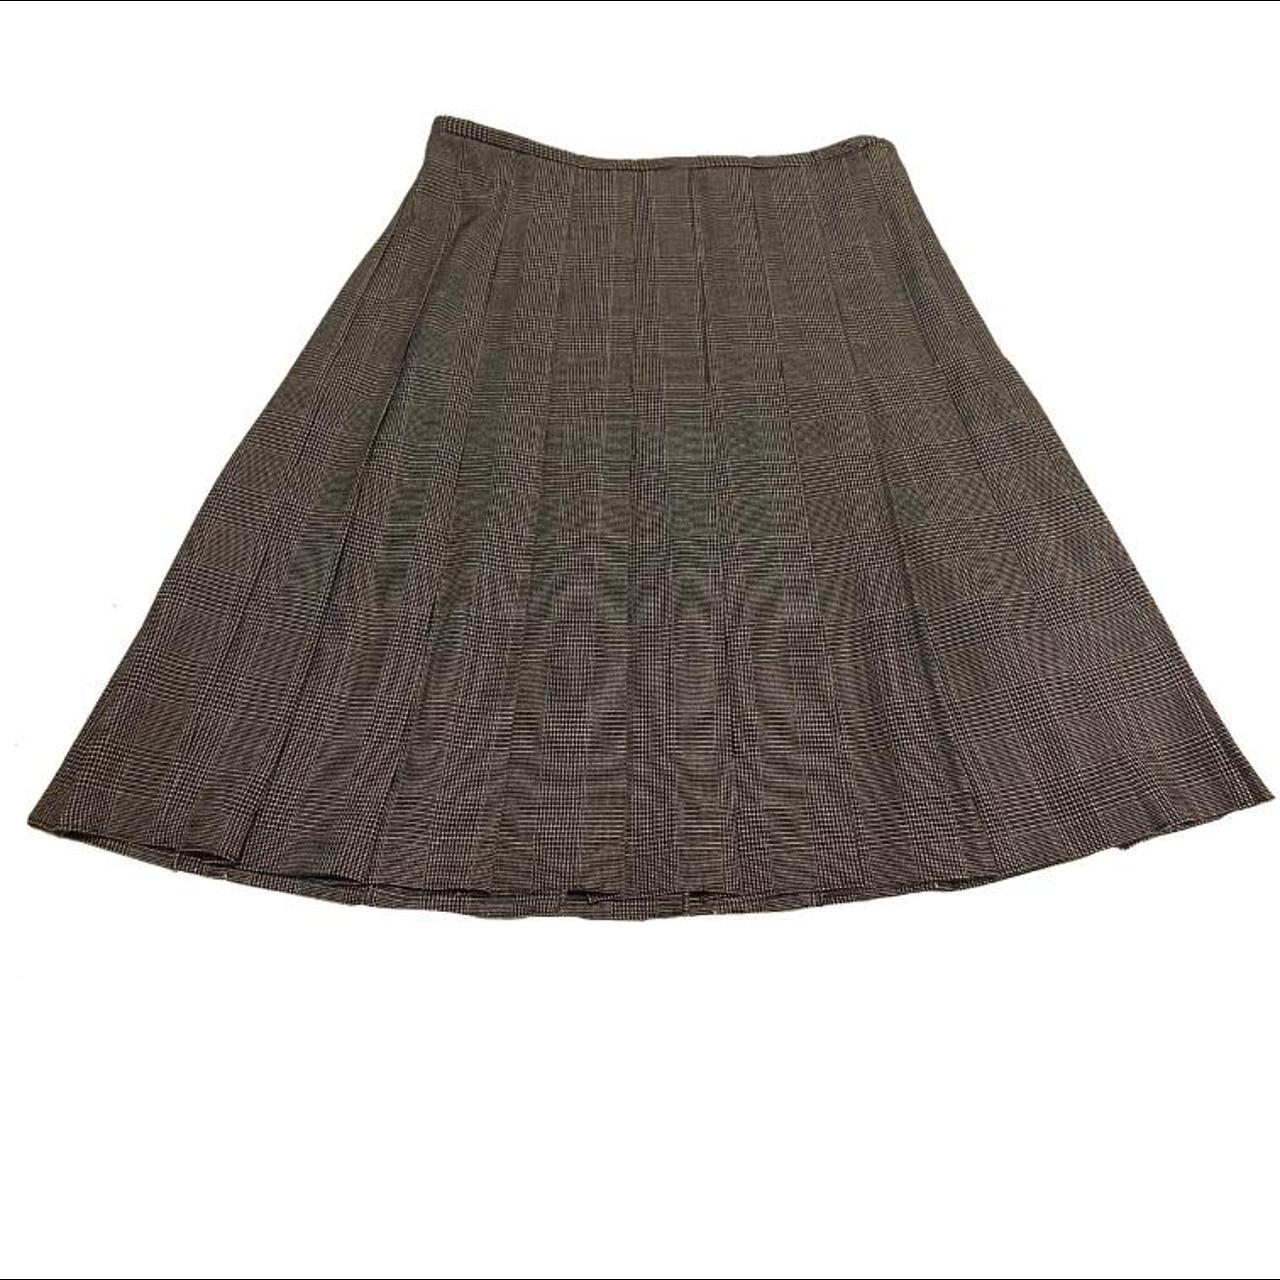 Vintage high rise pleated skirt ♡ This is a... - Depop